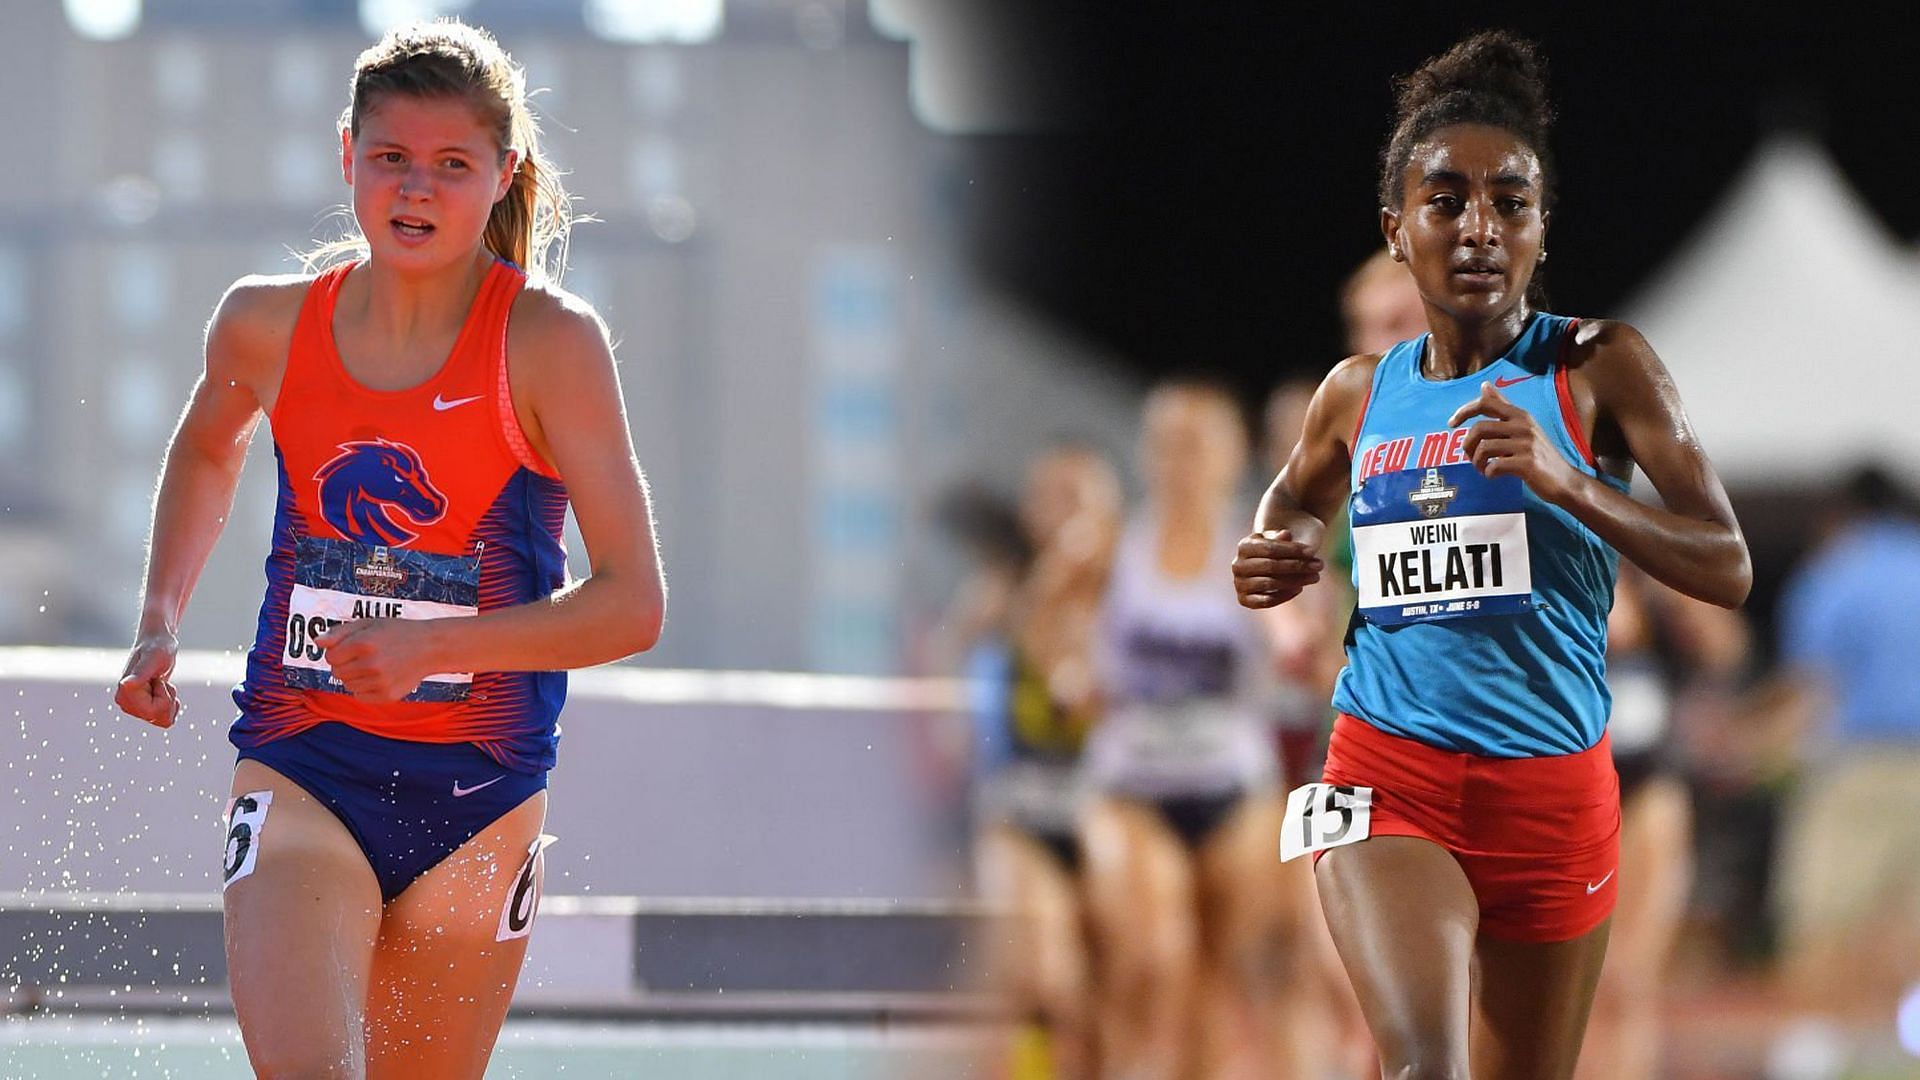 Allie Ostrander and Weini Kelati will compete at the World Athletics Cross Country Championships 2024.